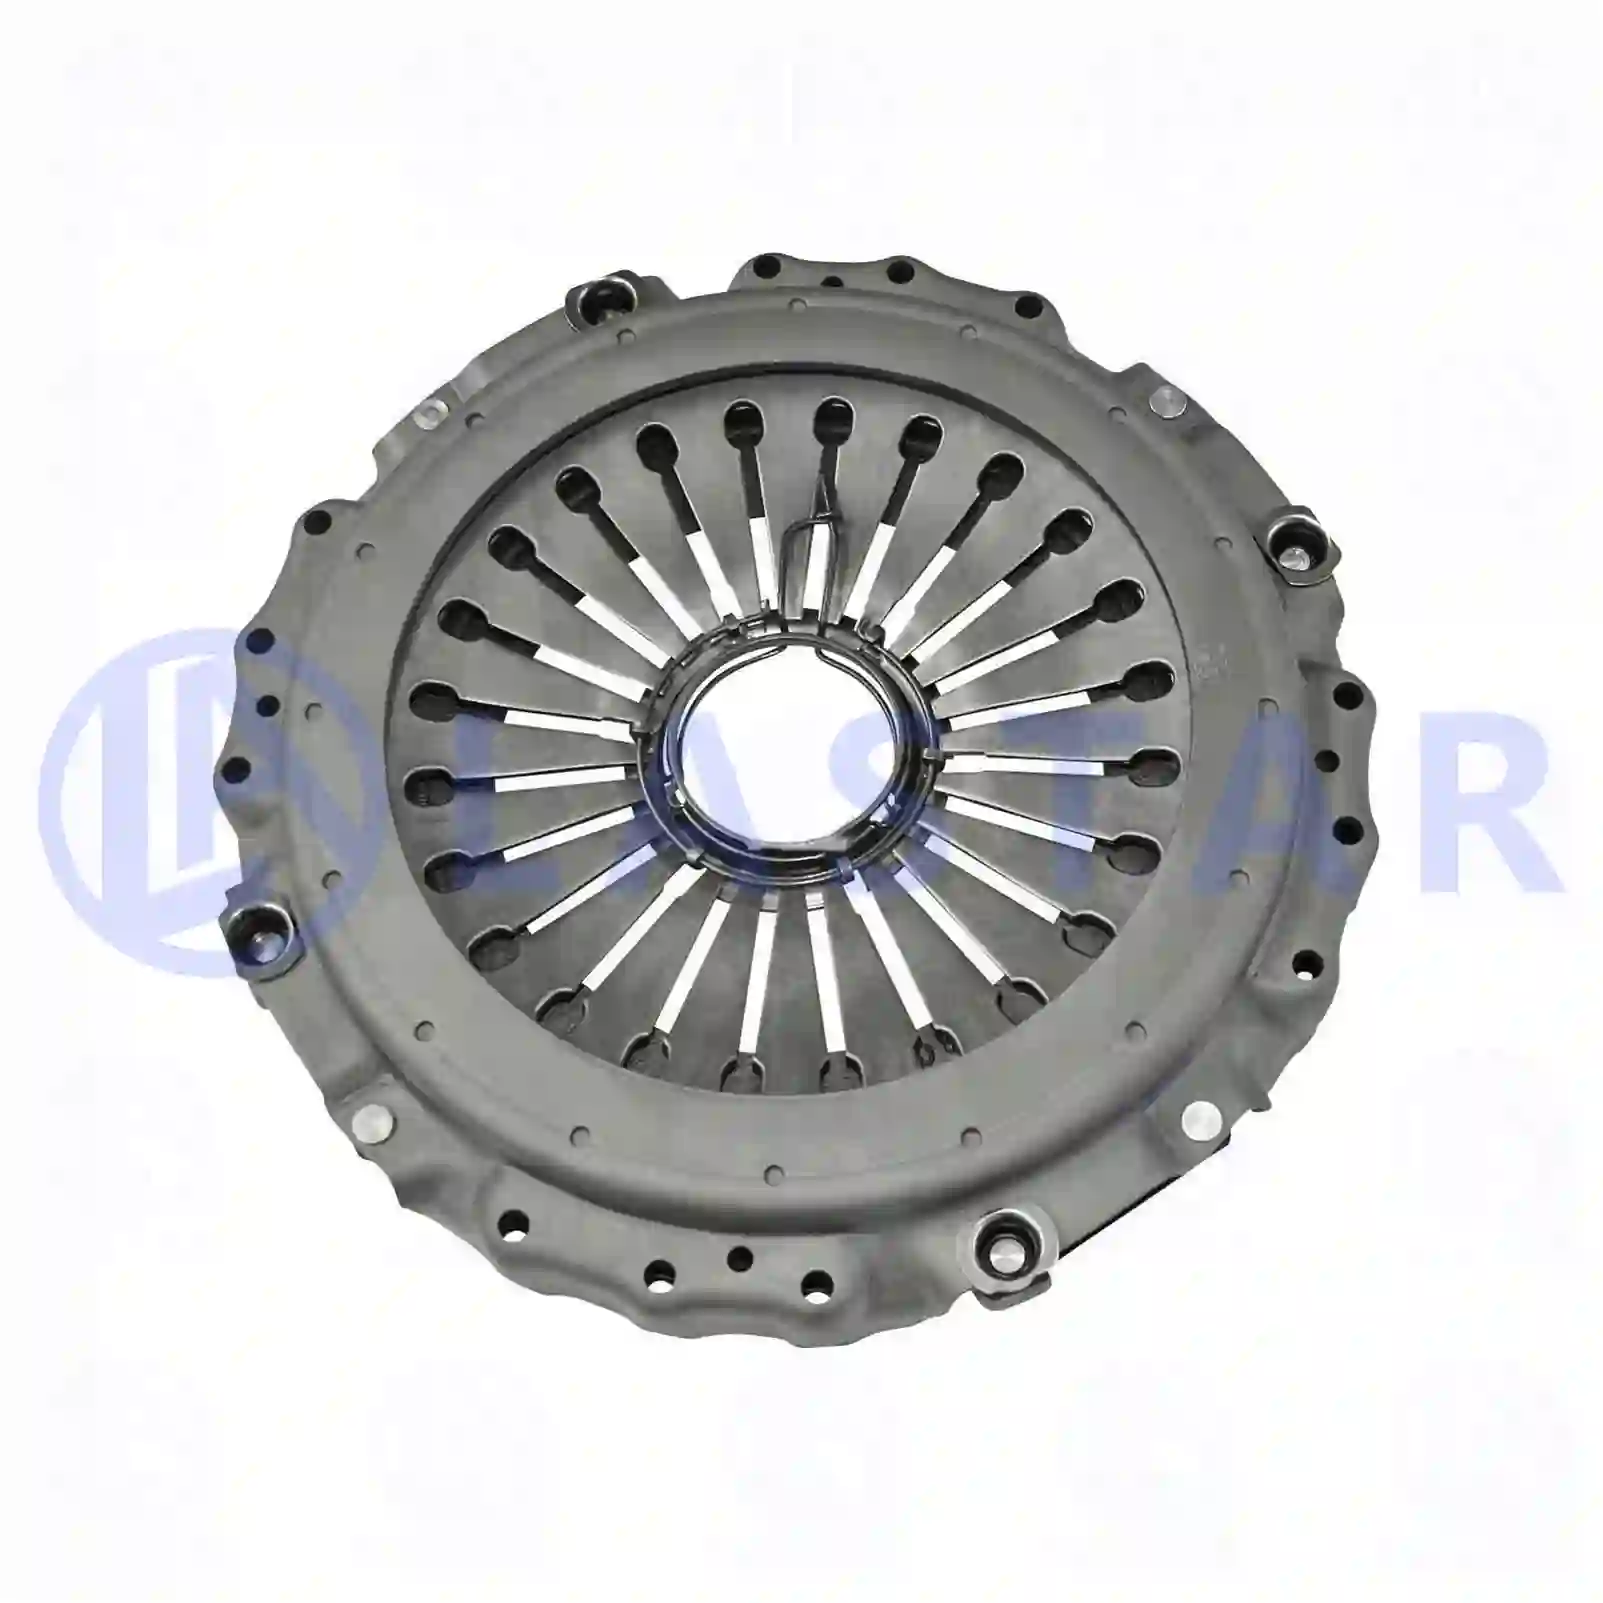 Clutch cover, 77721885, 503118808, 81303050204, 81303050214, 81303050219, 81303050221, 81303050229, 81303050239, 81303059204, 81303059219, 81303059221, 81303059229, 5010545836, 518312, 2V5141025A ||  77721885 Lastar Spare Part | Truck Spare Parts, Auotomotive Spare Parts Clutch cover, 77721885, 503118808, 81303050204, 81303050214, 81303050219, 81303050221, 81303050229, 81303050239, 81303059204, 81303059219, 81303059221, 81303059229, 5010545836, 518312, 2V5141025A ||  77721885 Lastar Spare Part | Truck Spare Parts, Auotomotive Spare Parts